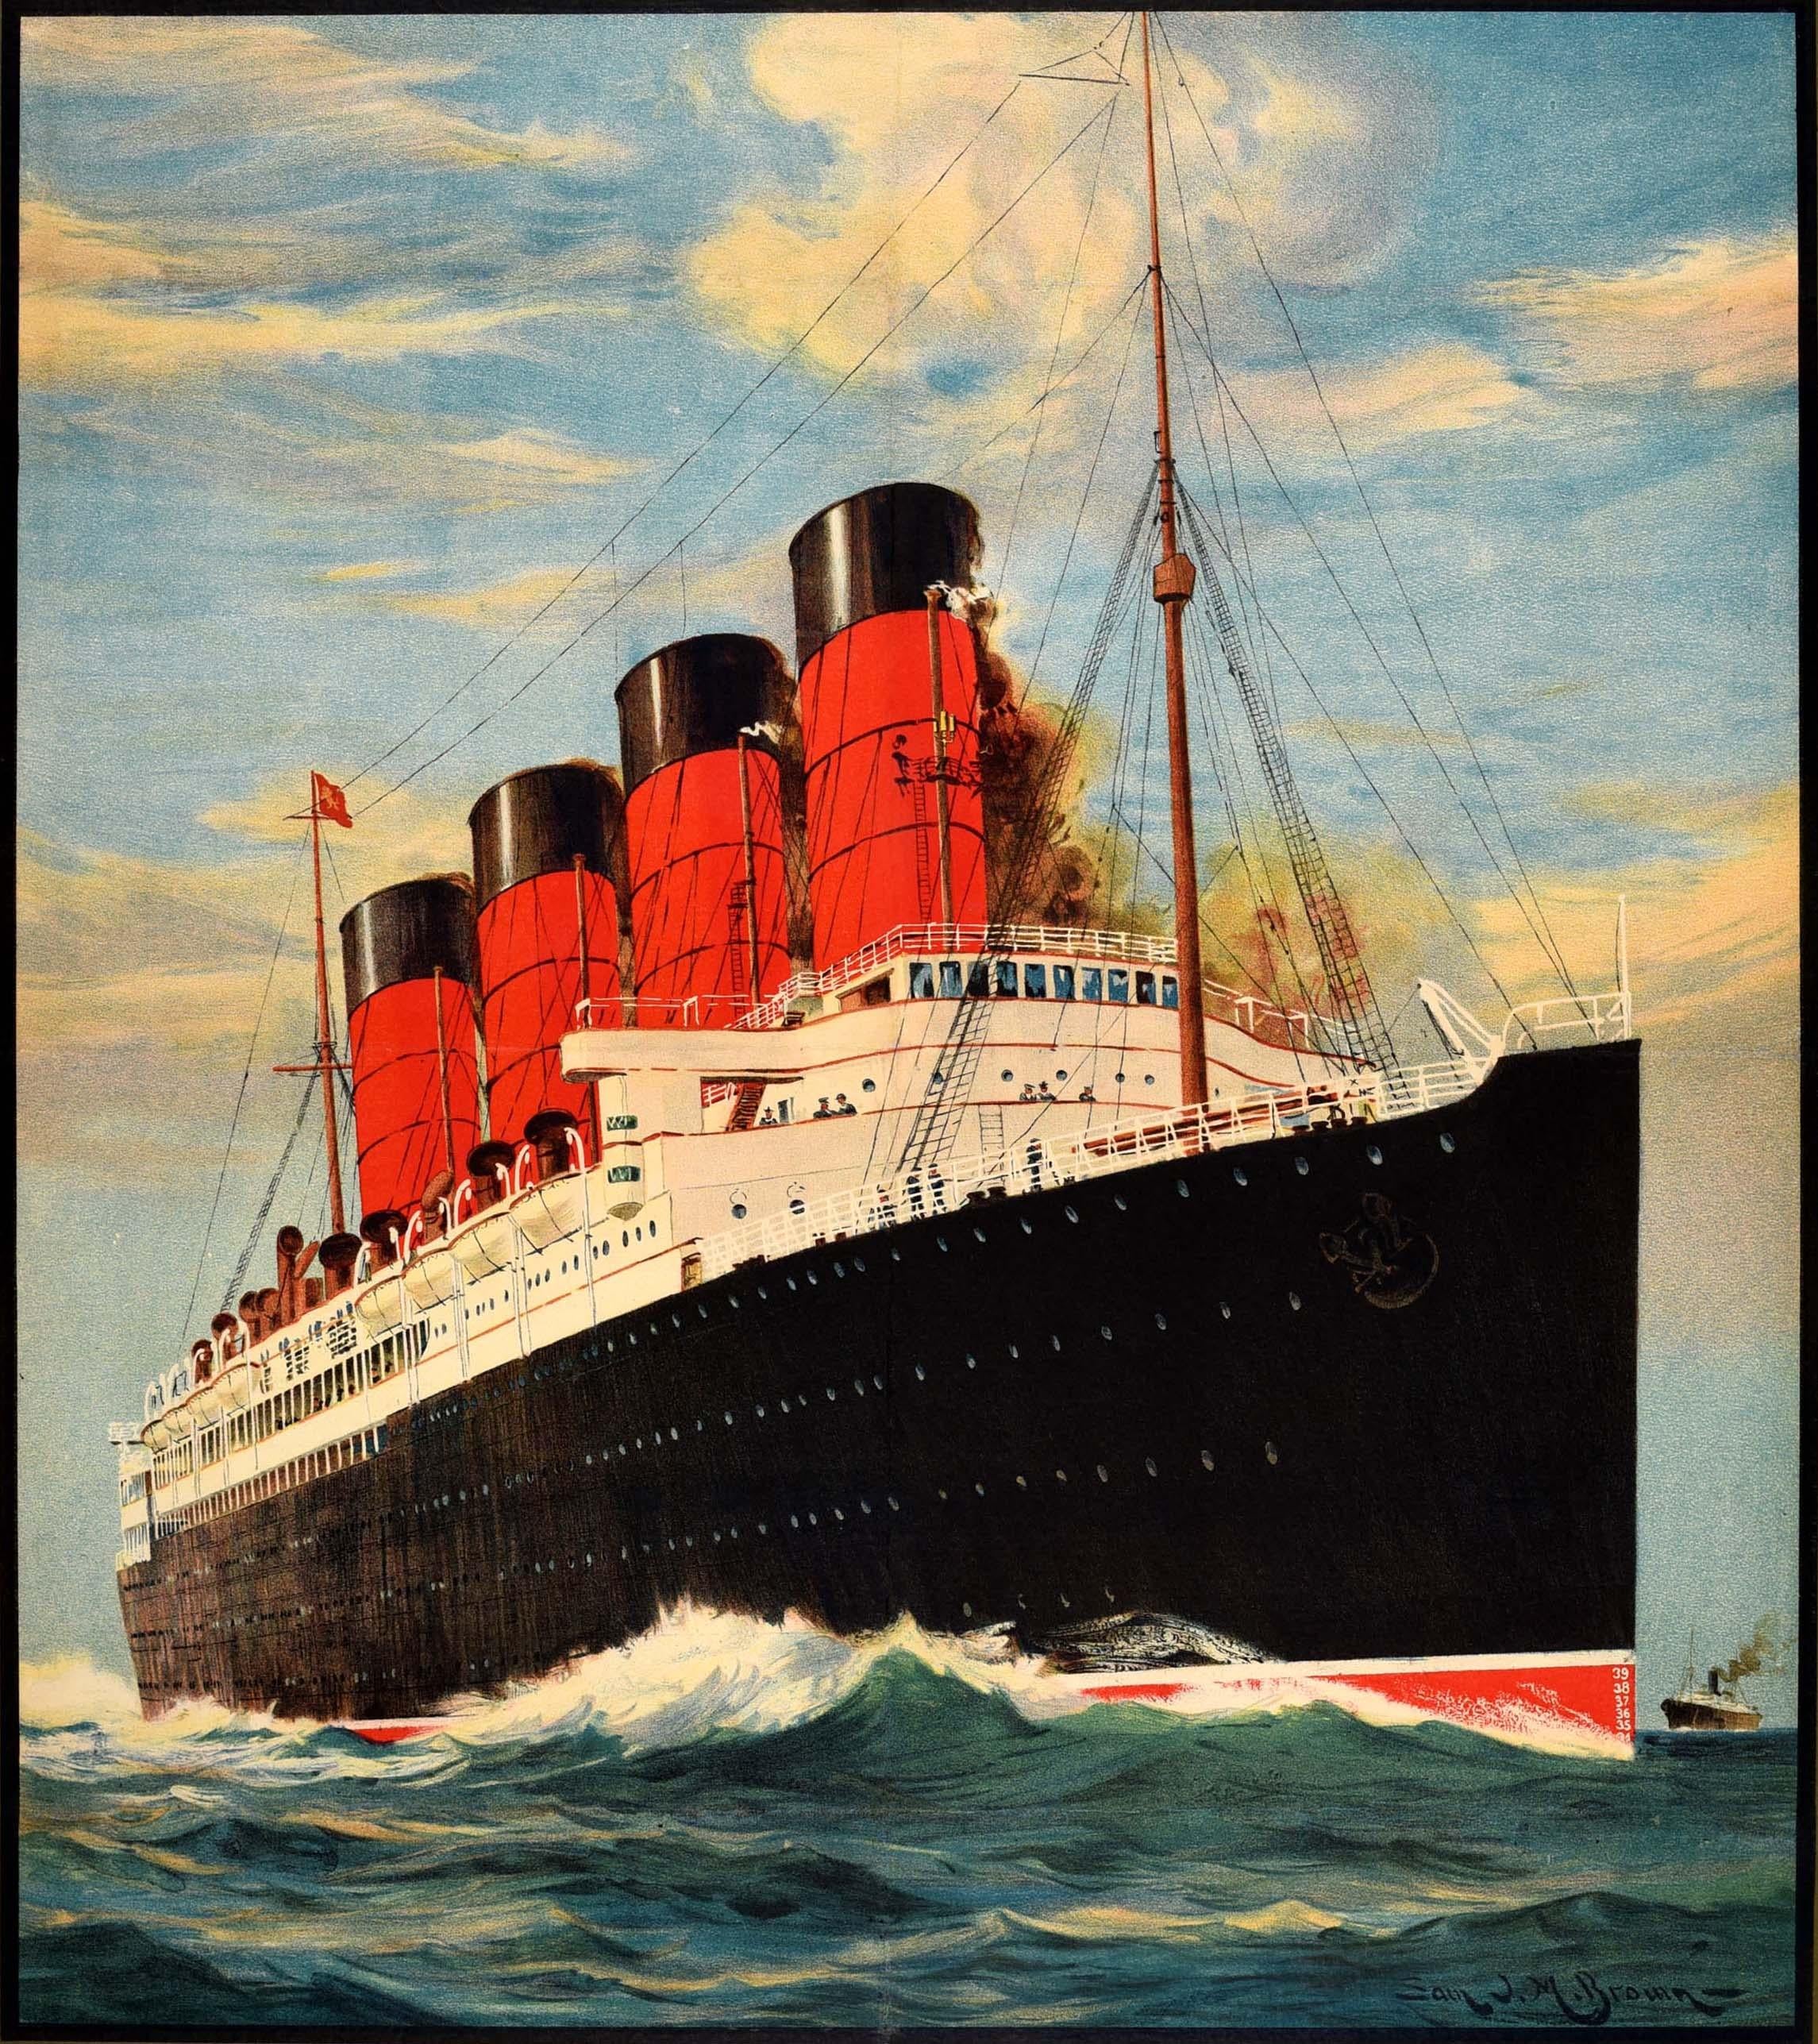 Original vintage travel advertising poster for Cunard Line Europe-America featuring a stunning illustration by Samuel John Milton Brown (1873-1965) of a four funnel Cunard Line cruise liner ship sailing across the ocean with another ship visible at